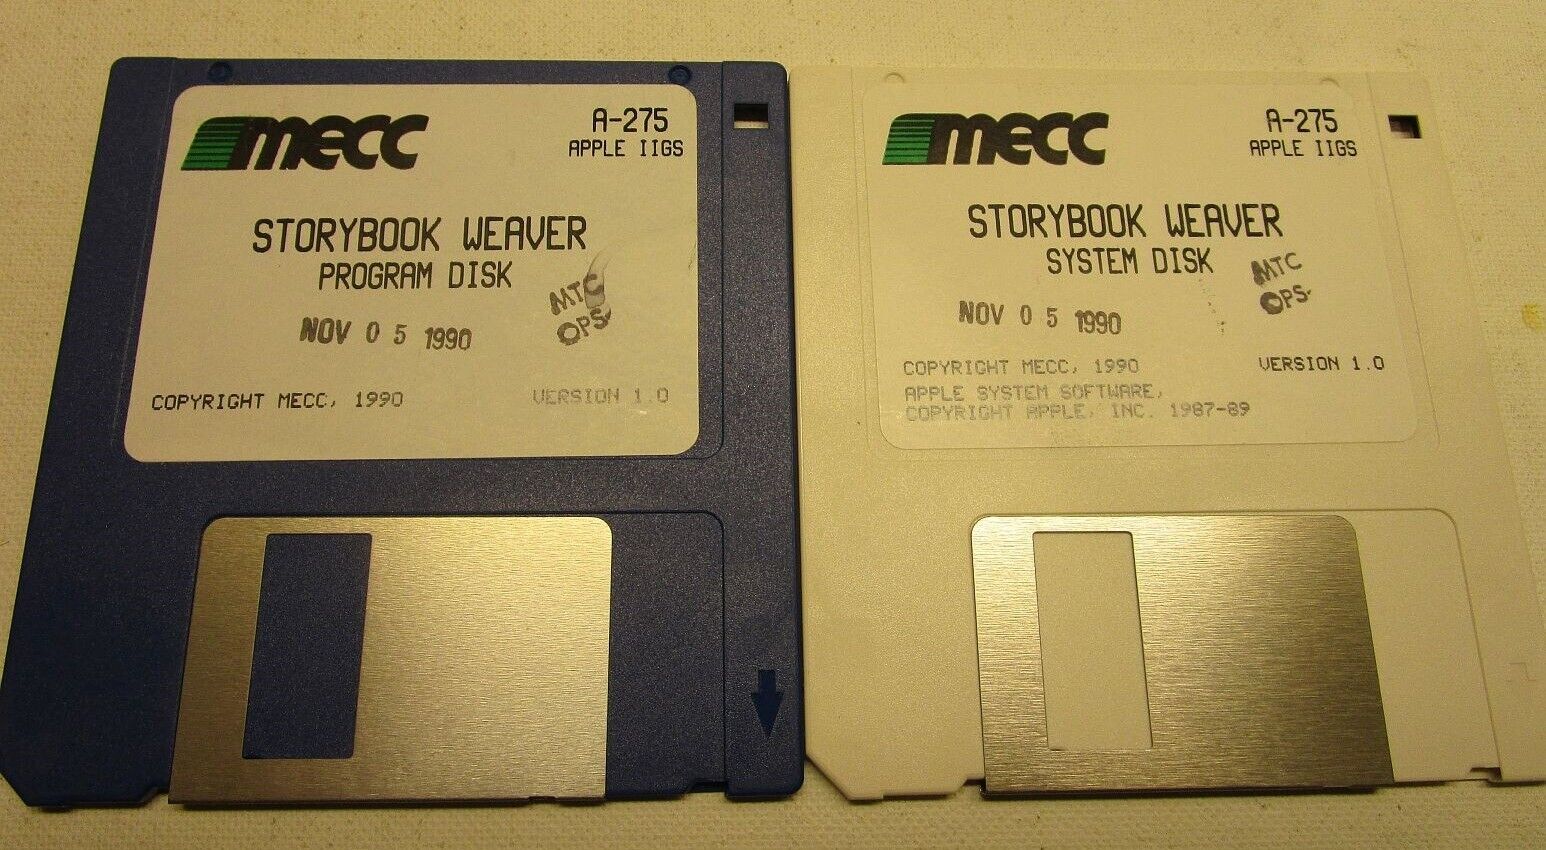 RARE Storybook Weaver by MECC for Apple IIGS